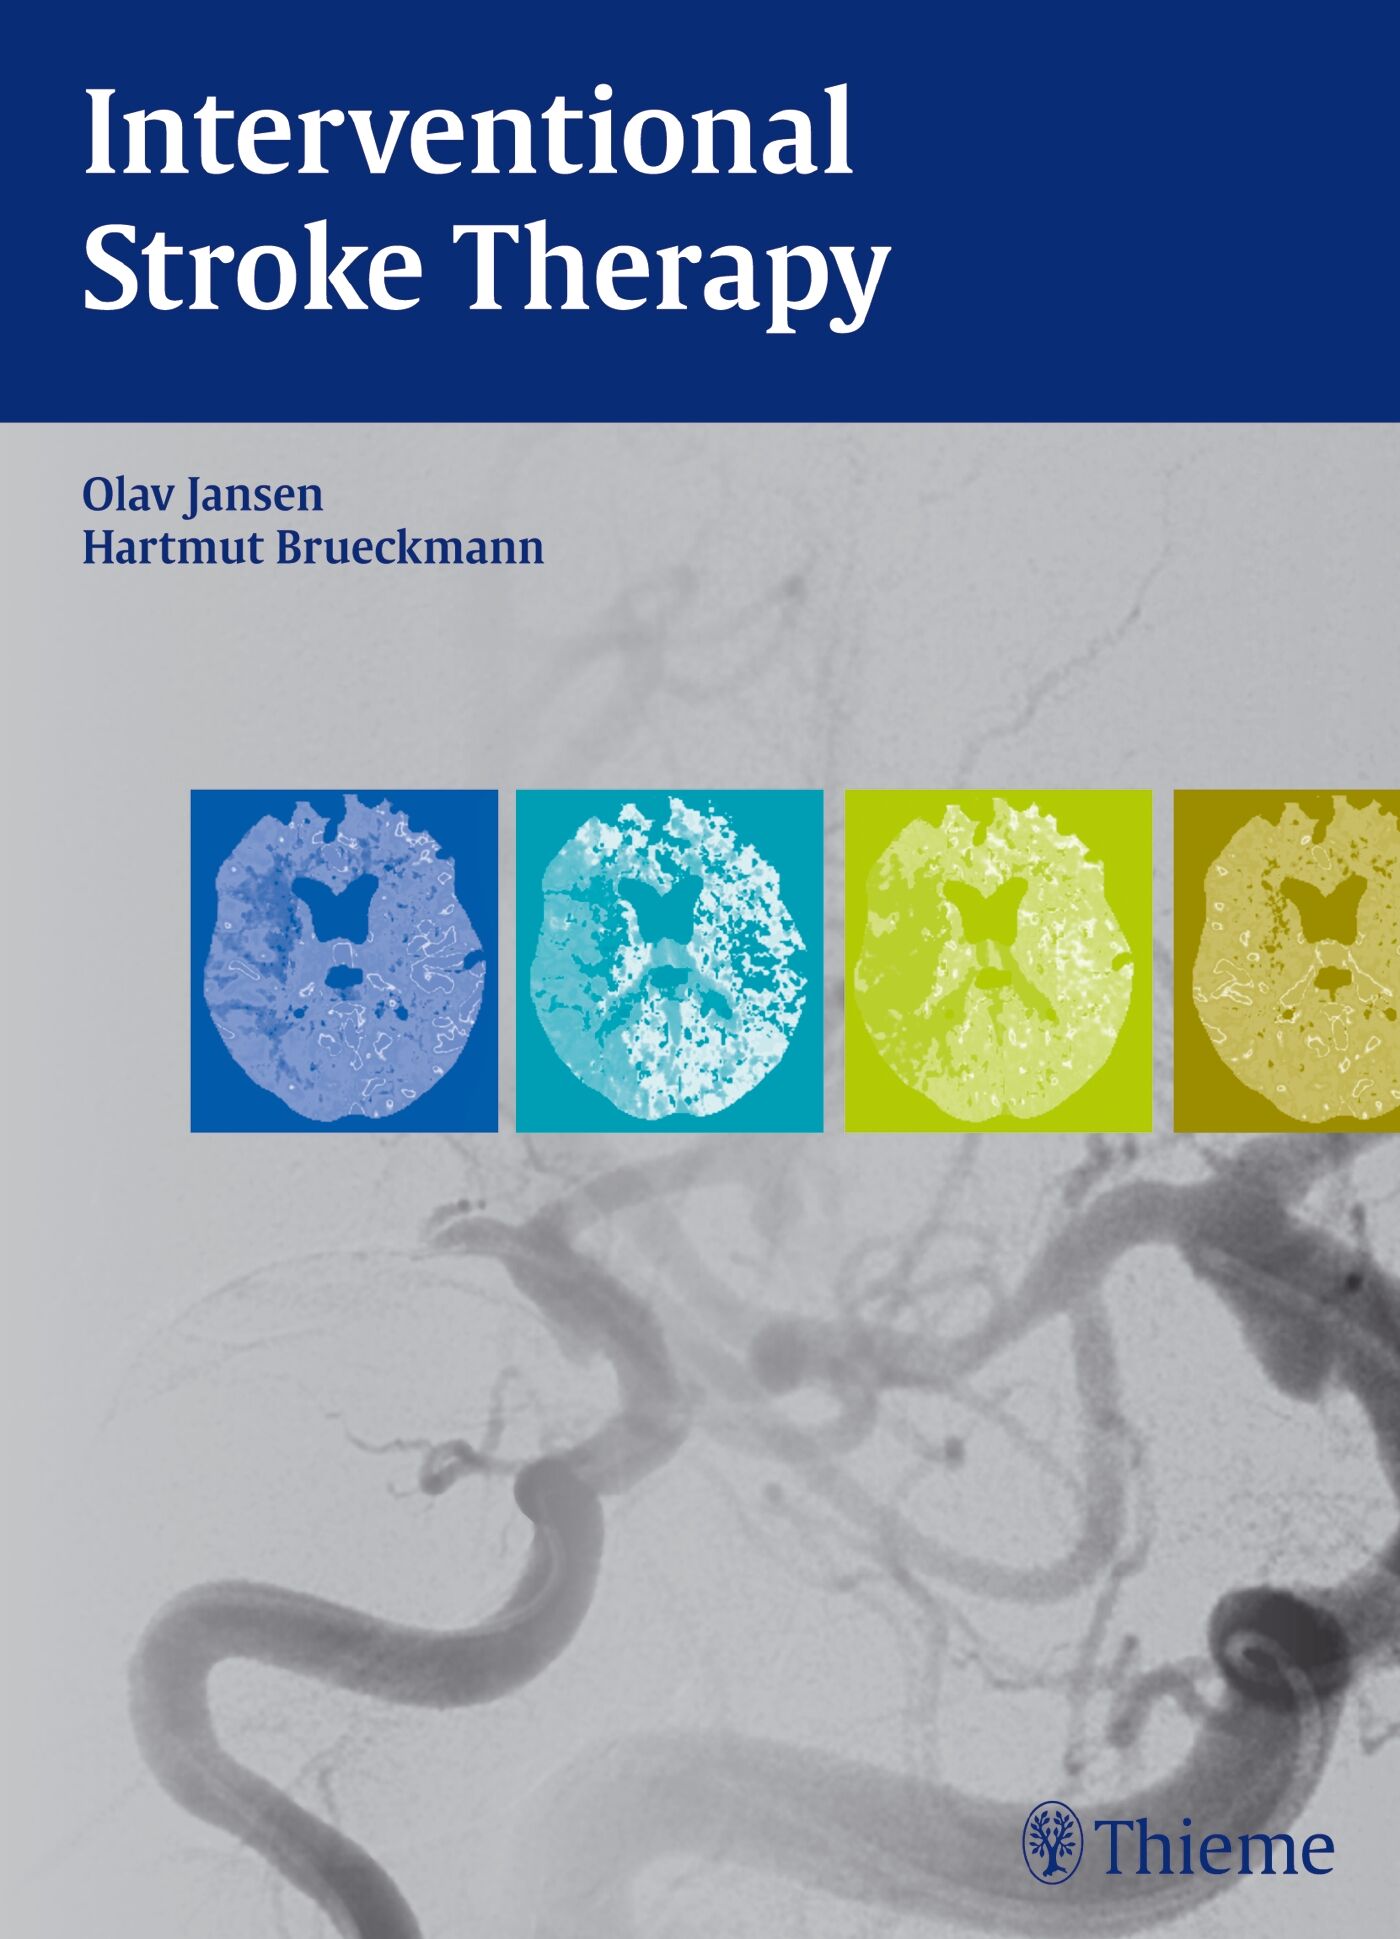 Interventional Stroke Therapy, 9783131699213